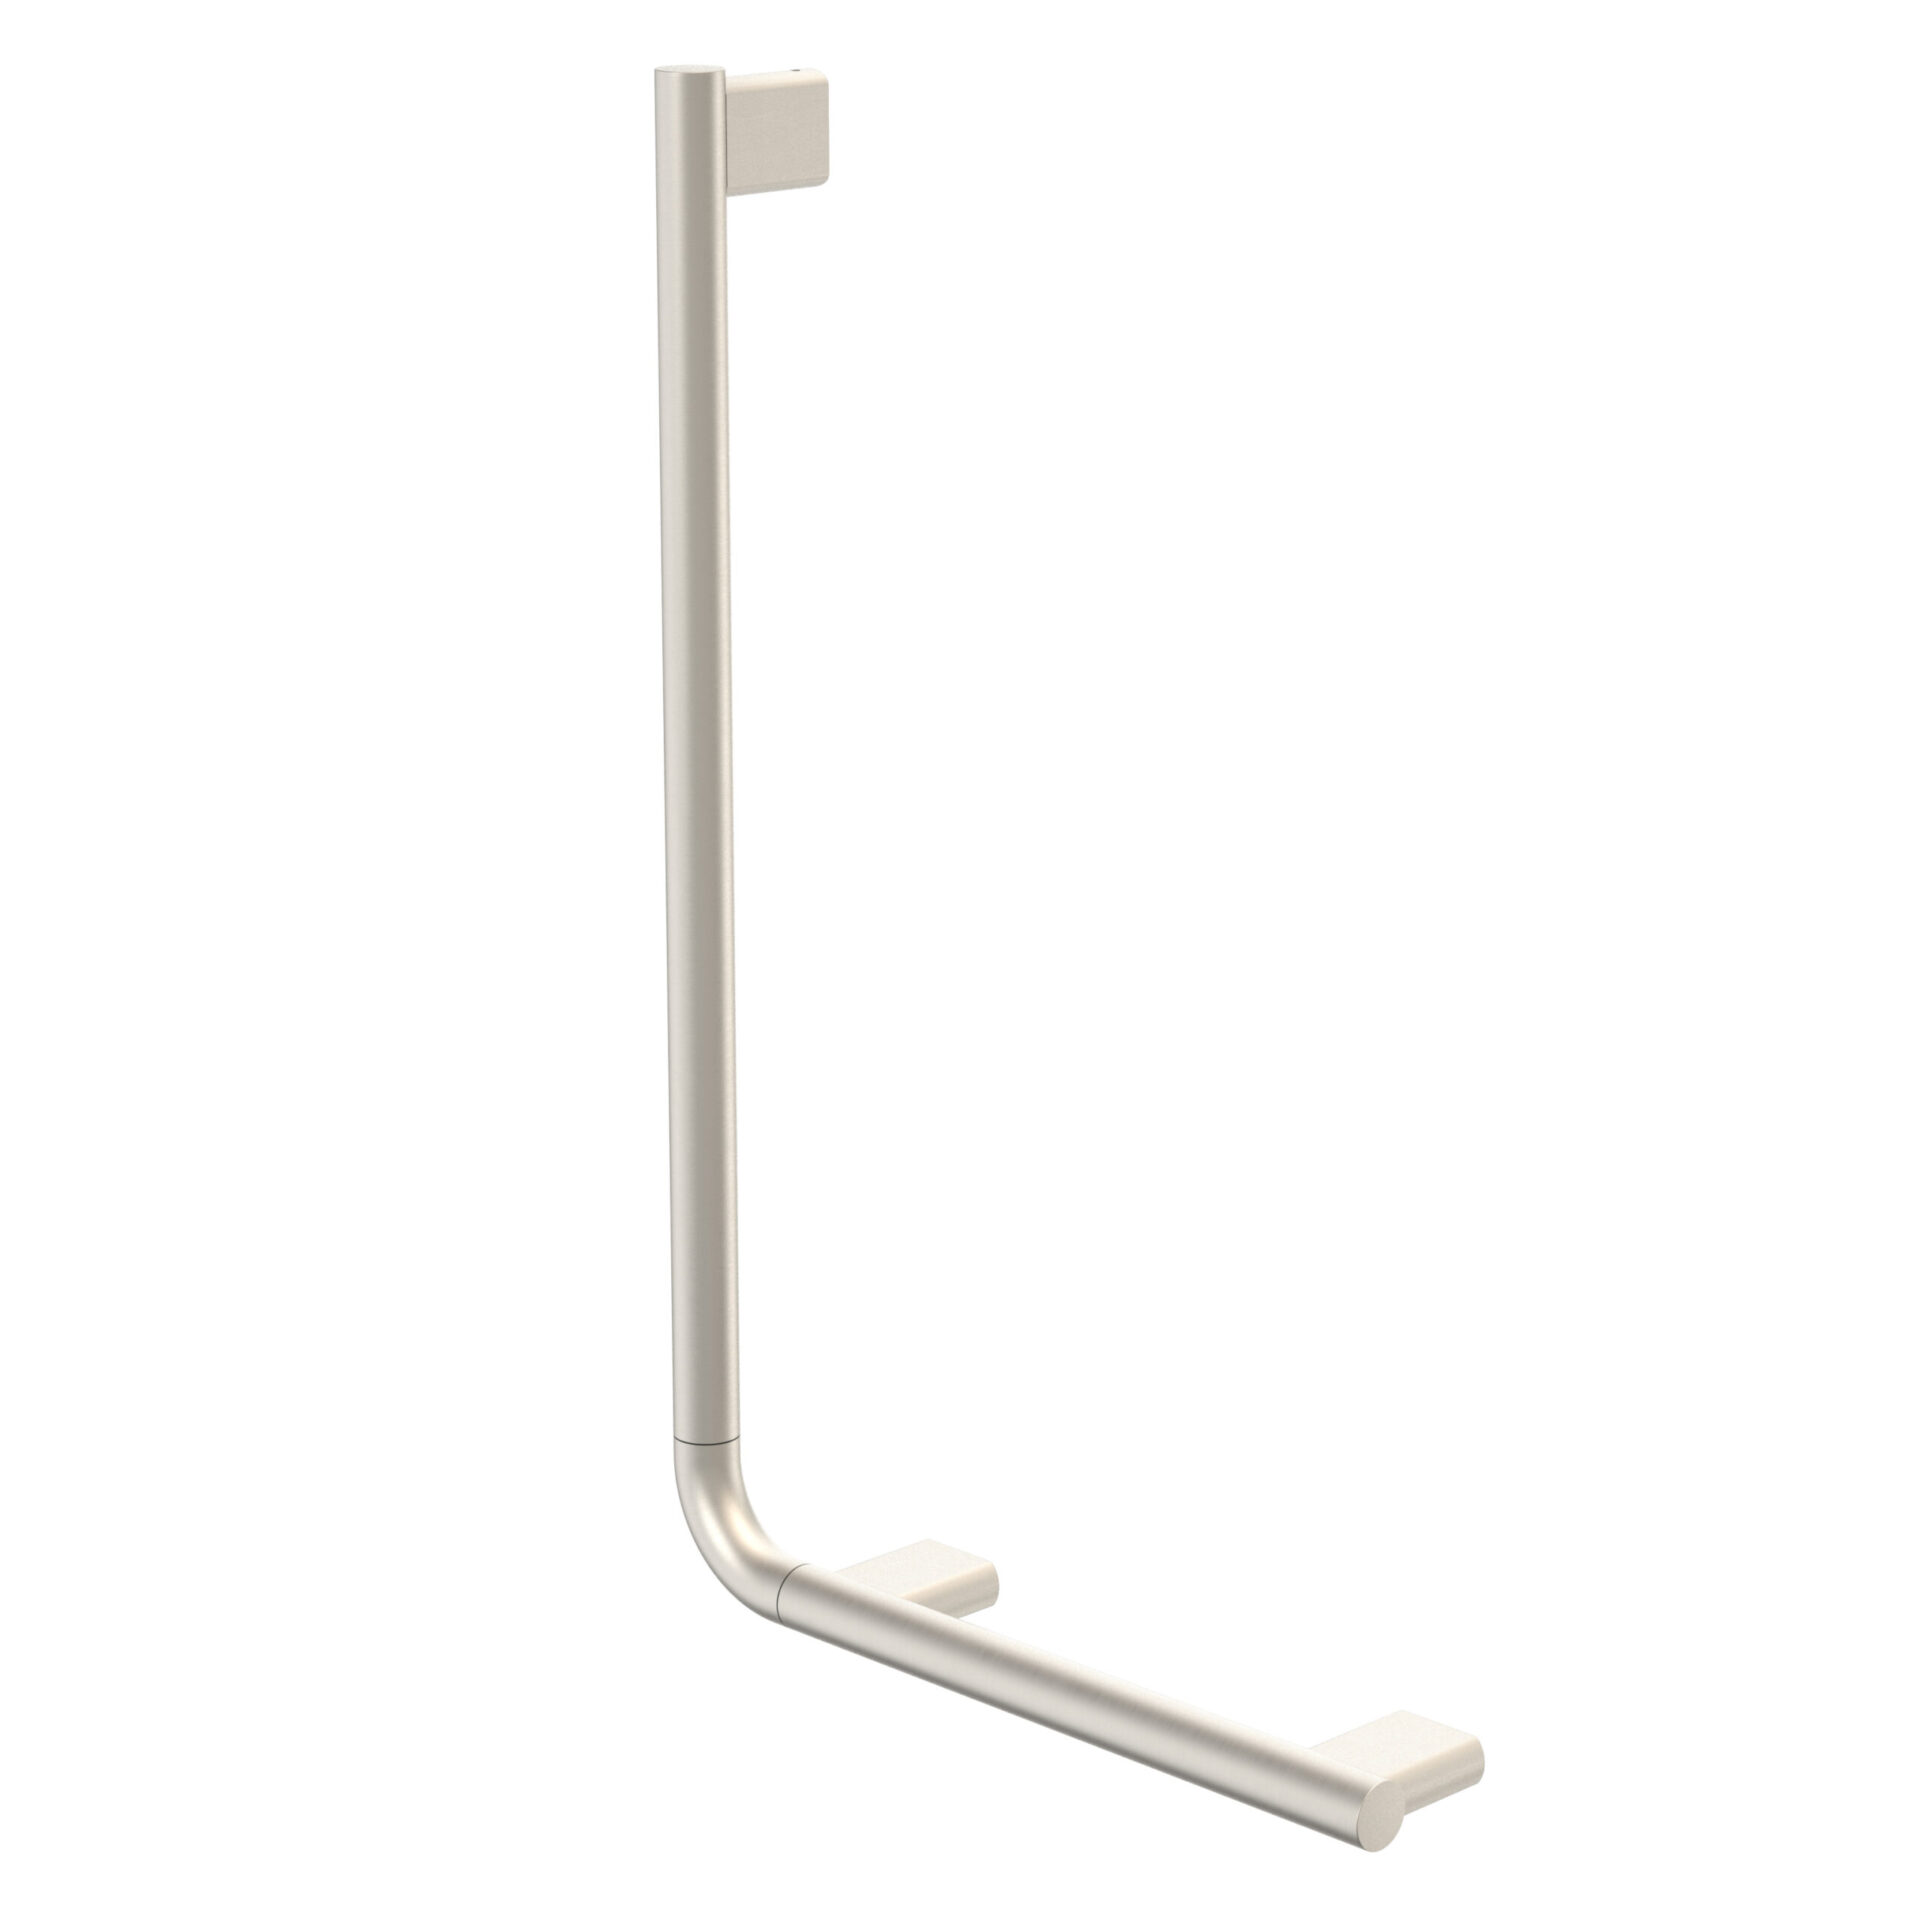 Caroma's stunning and sleek range of Opal Support Rails are designed for assisted living in the home and in Aged Care. The rails improve bathroom safety and independence by providing additional support and balance assistance